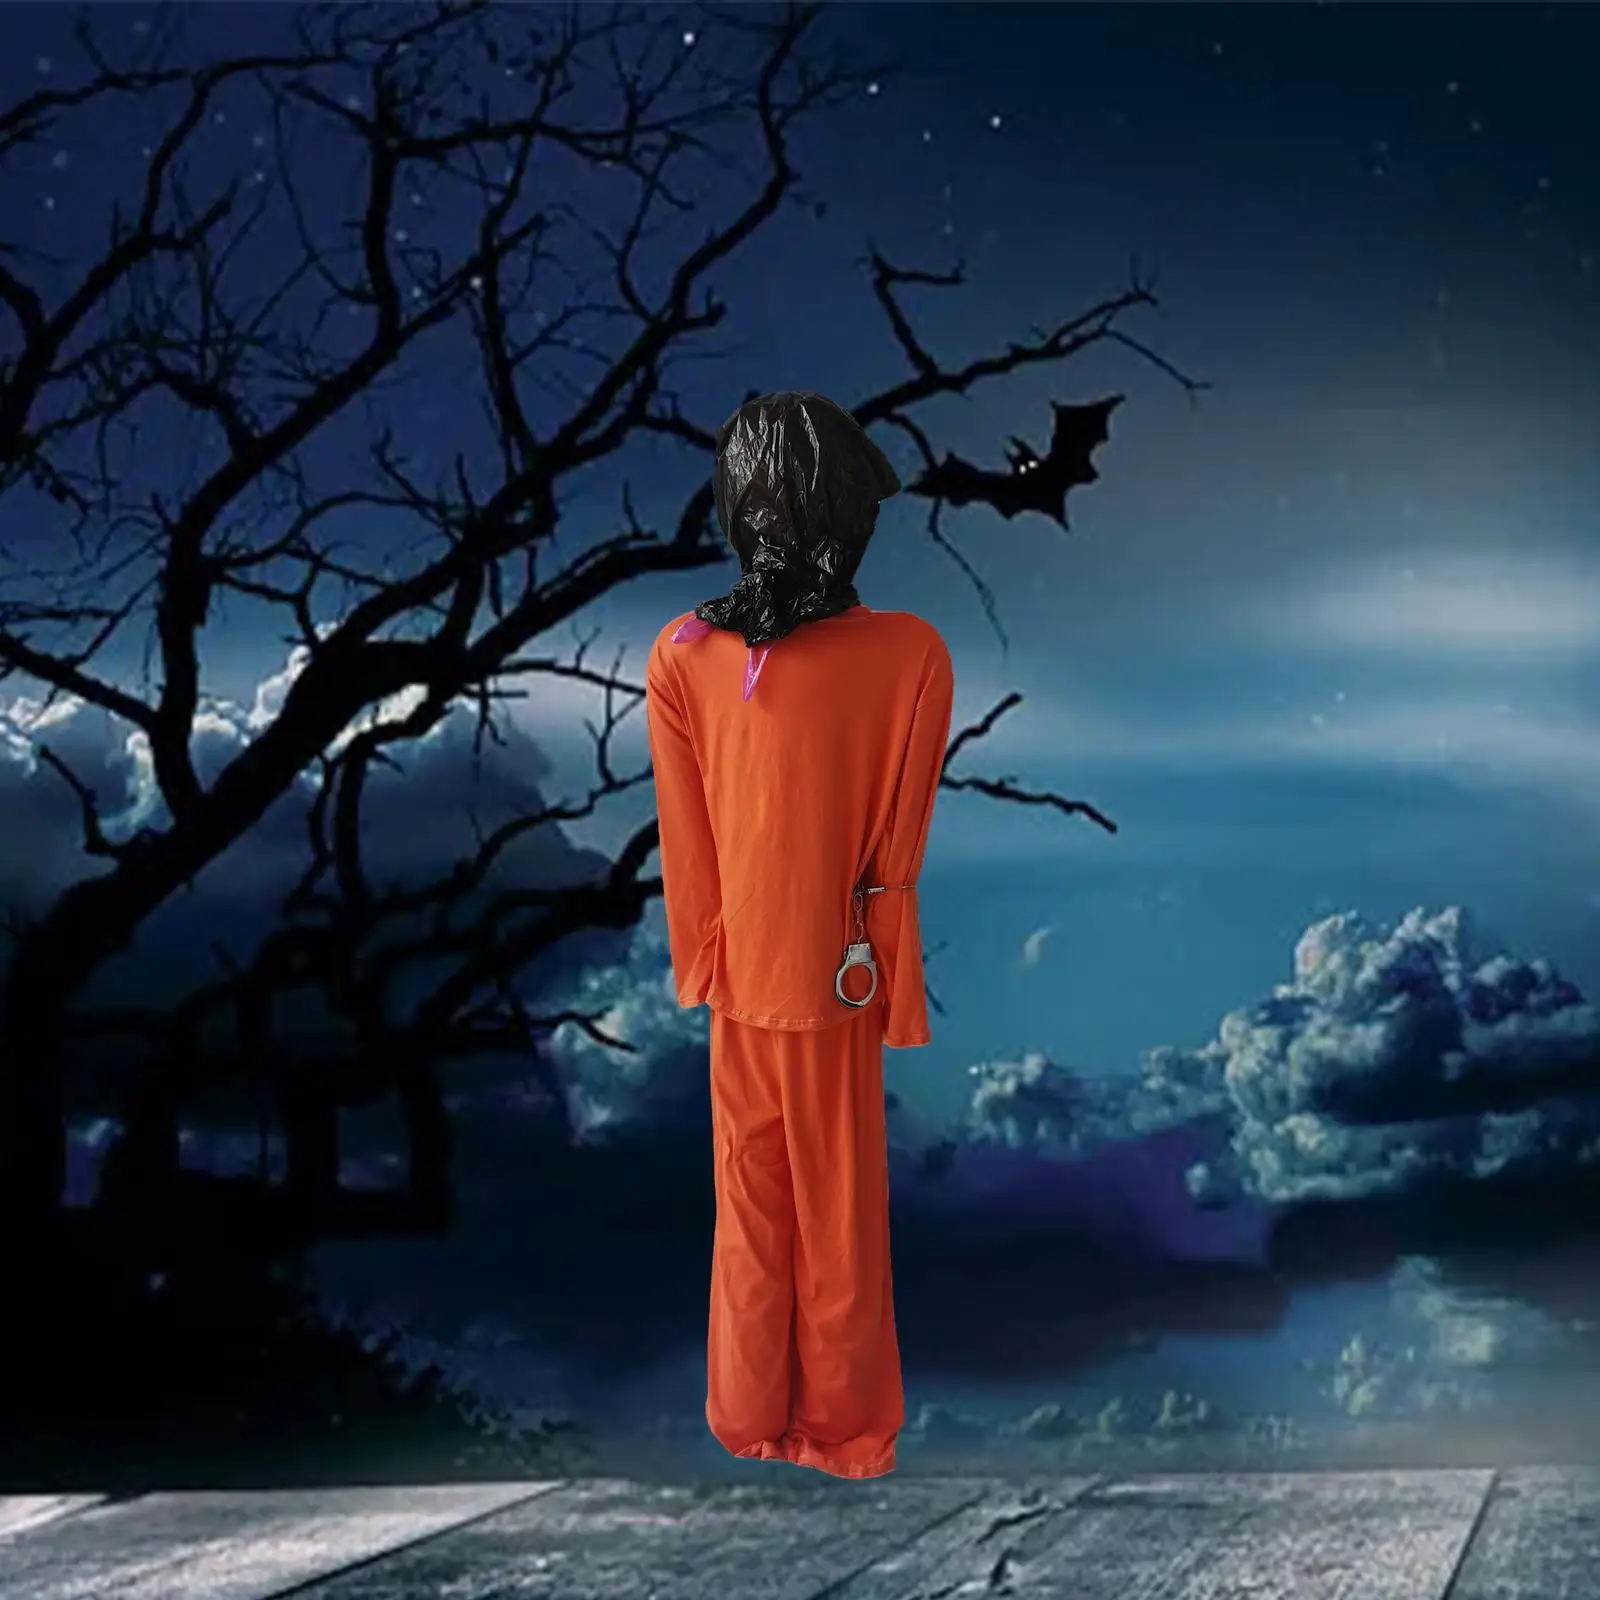 

Halloween Scary Prison Uniform Accessory Death Row Ornament Prisoner Costumes Dress up for Party Trees Carnival Window Festival